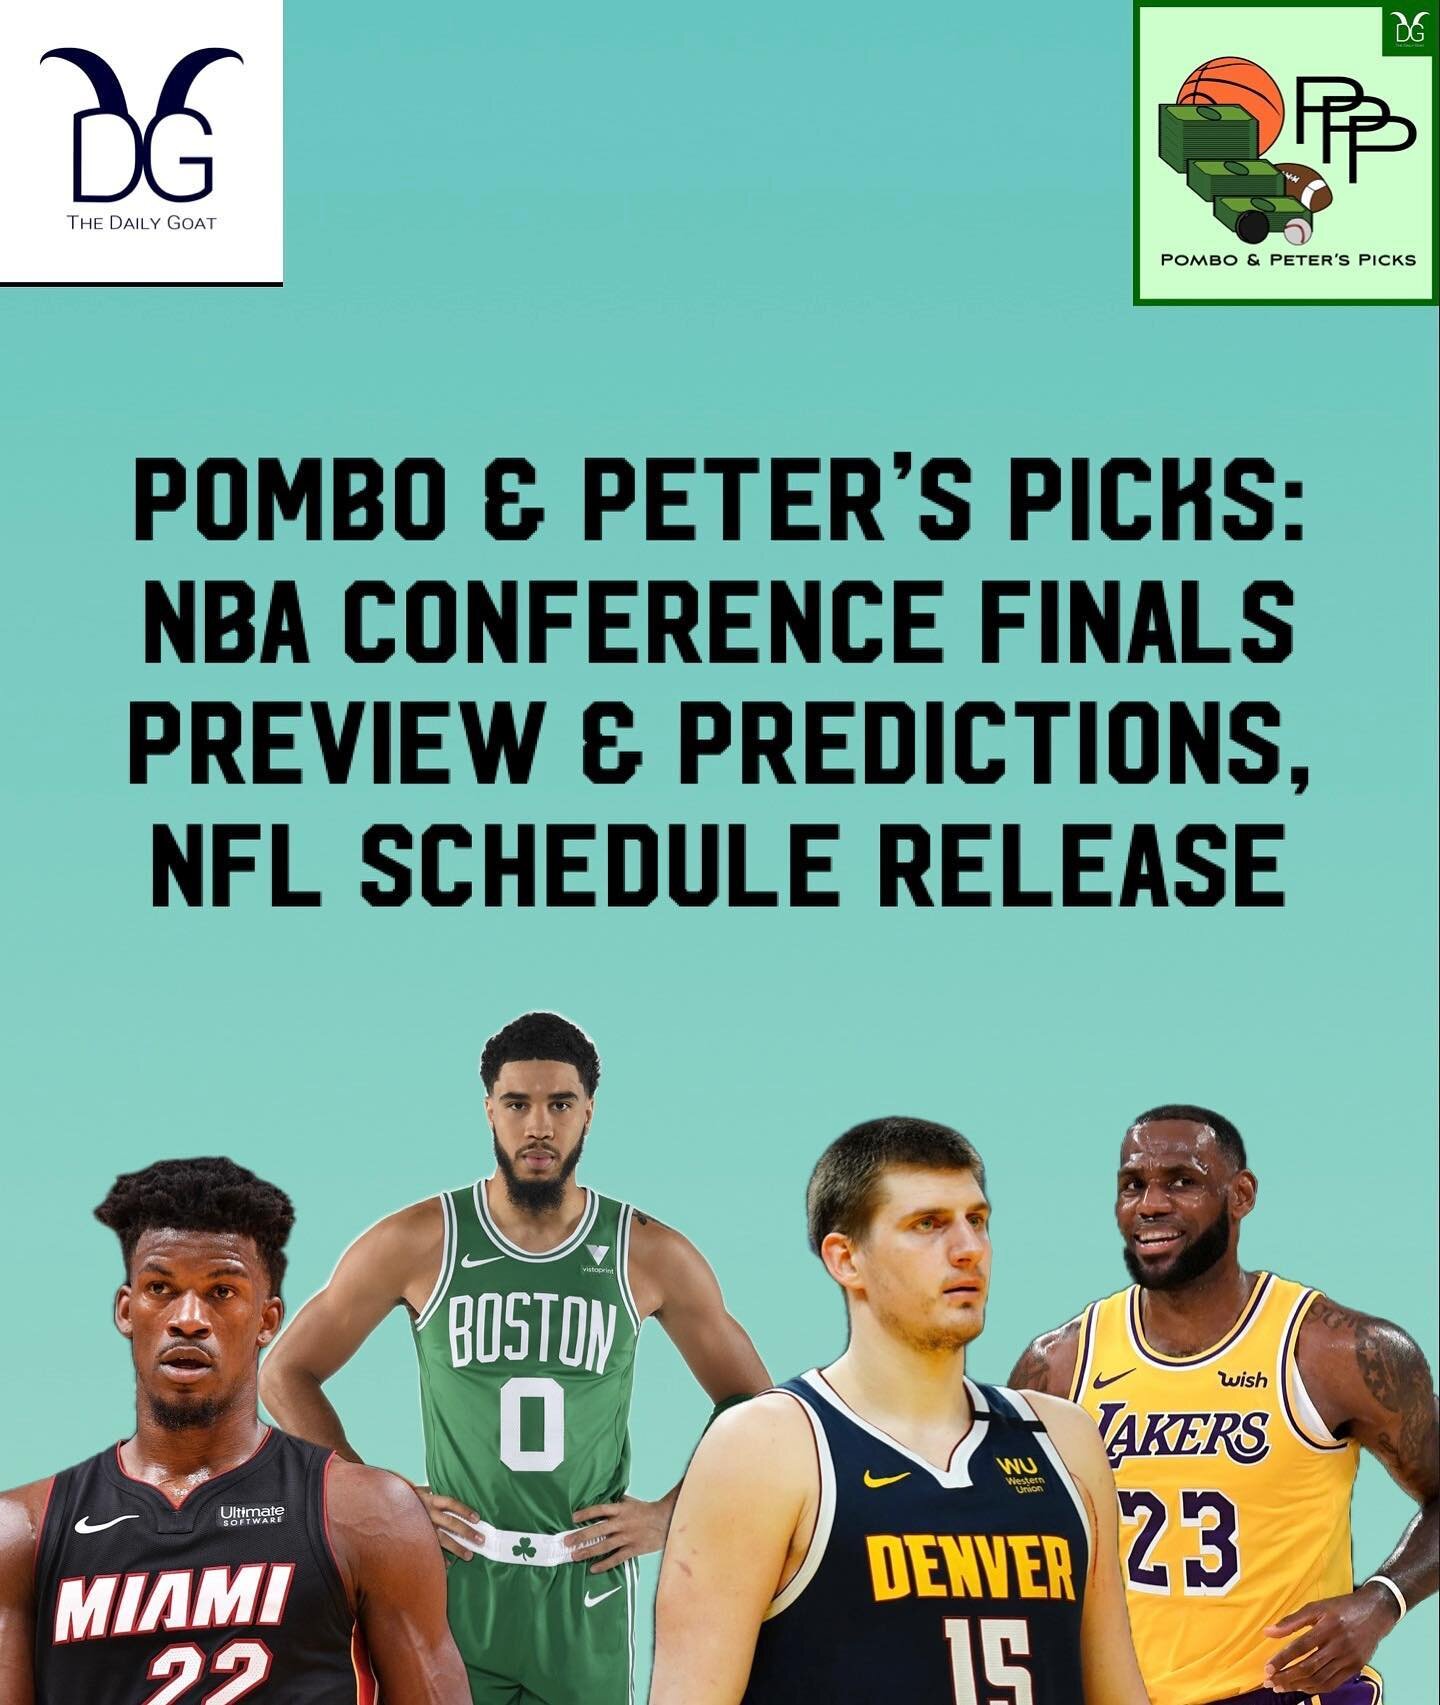 The new episode of @_pppicks with @jpombo24 &amp; @peteralves52 is out!

🏈 What are the most anticipated games of the NFL season?

🏀 @dbabb26 joins the show to preview the NBA  Conference Finals.

Link on our 👉Instagram Story
Or
Link in bio 👉 pod